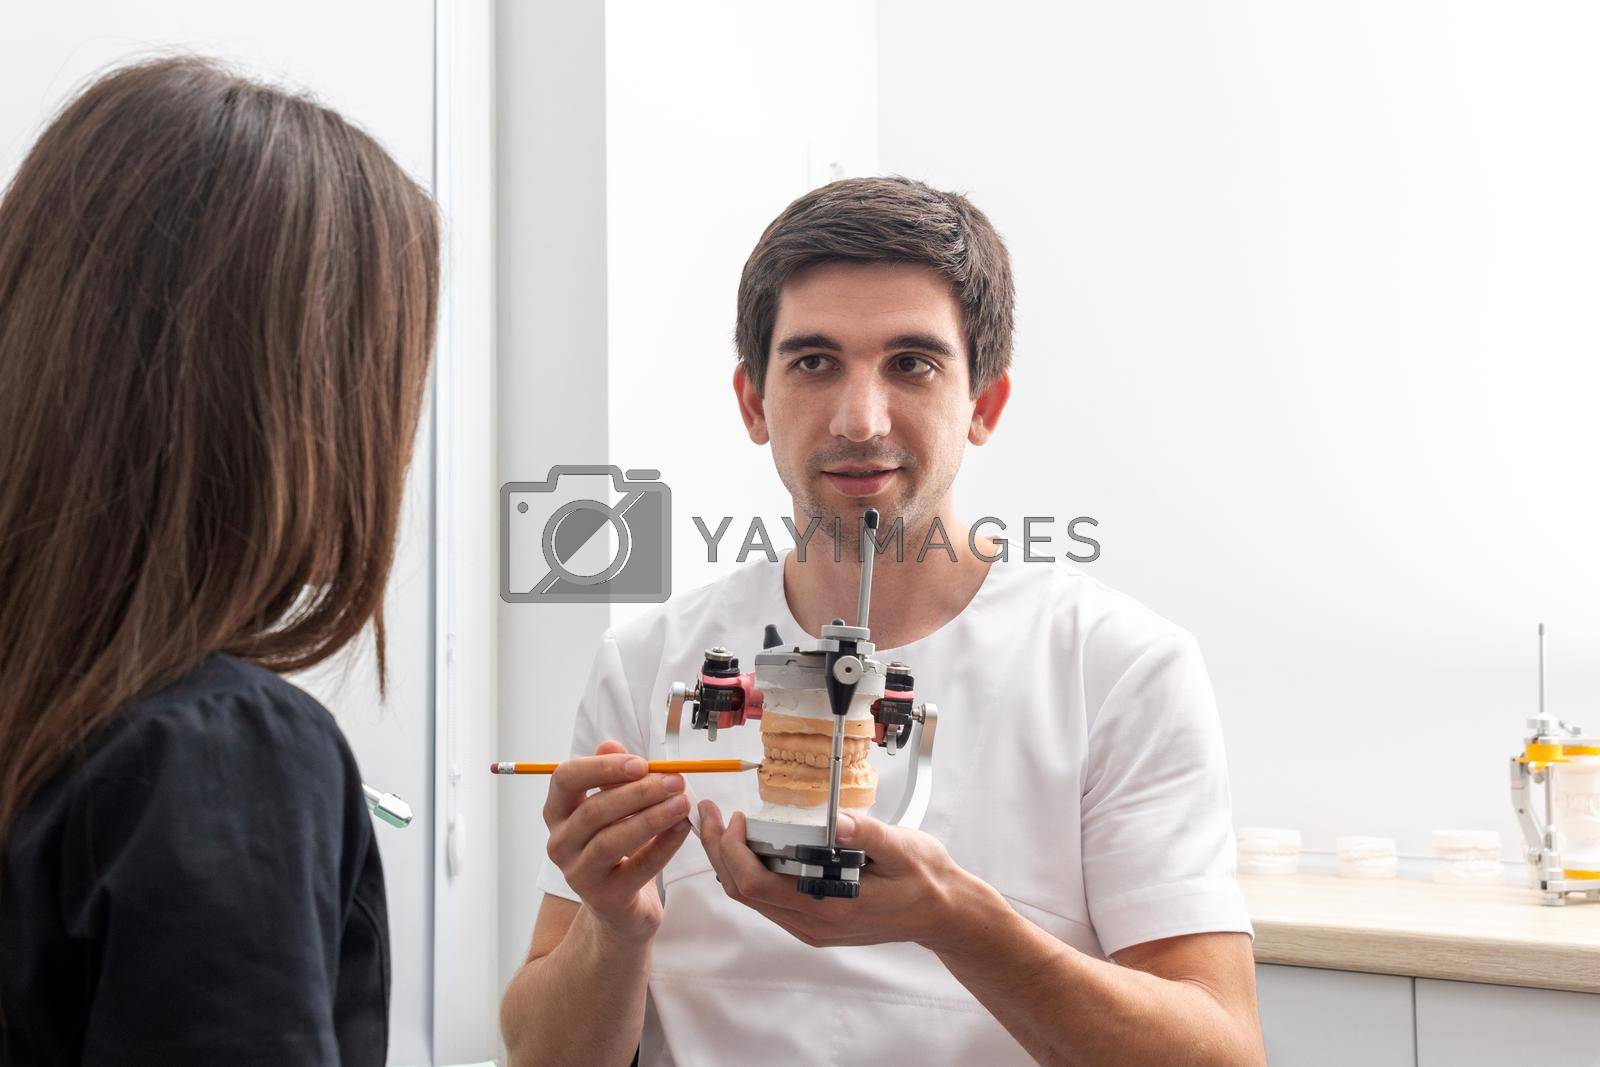 Royalty free image of Dentist holding dental articulator with dental gypsum prosthesis model showing it to a patient by Mariakray